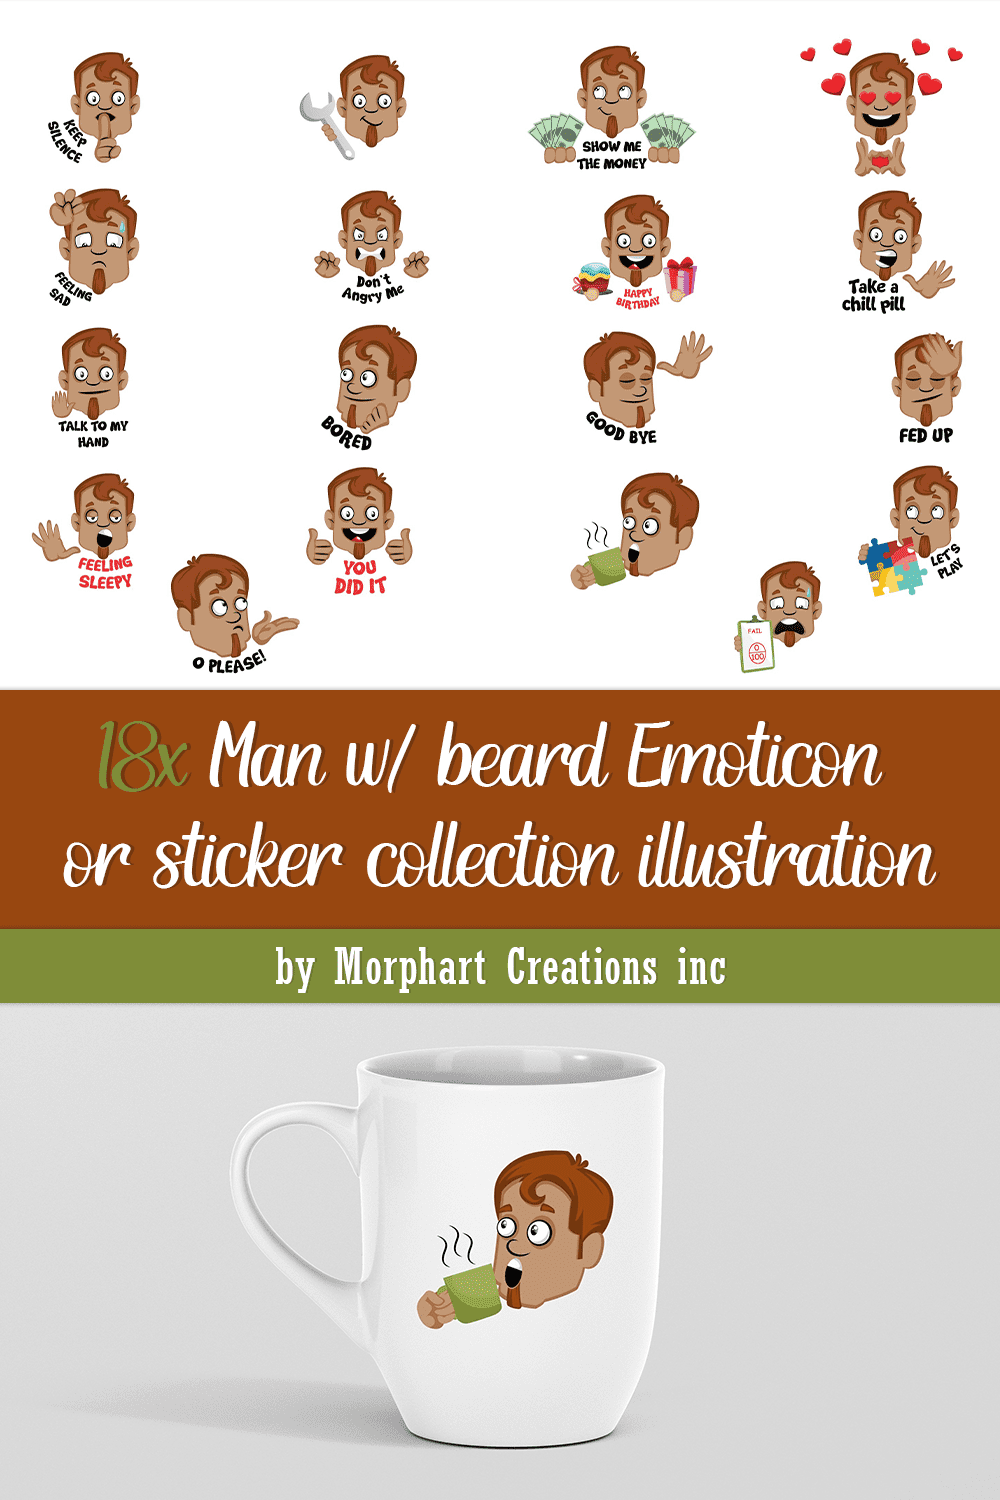 Pack of colorful images of man with beard emoticons.